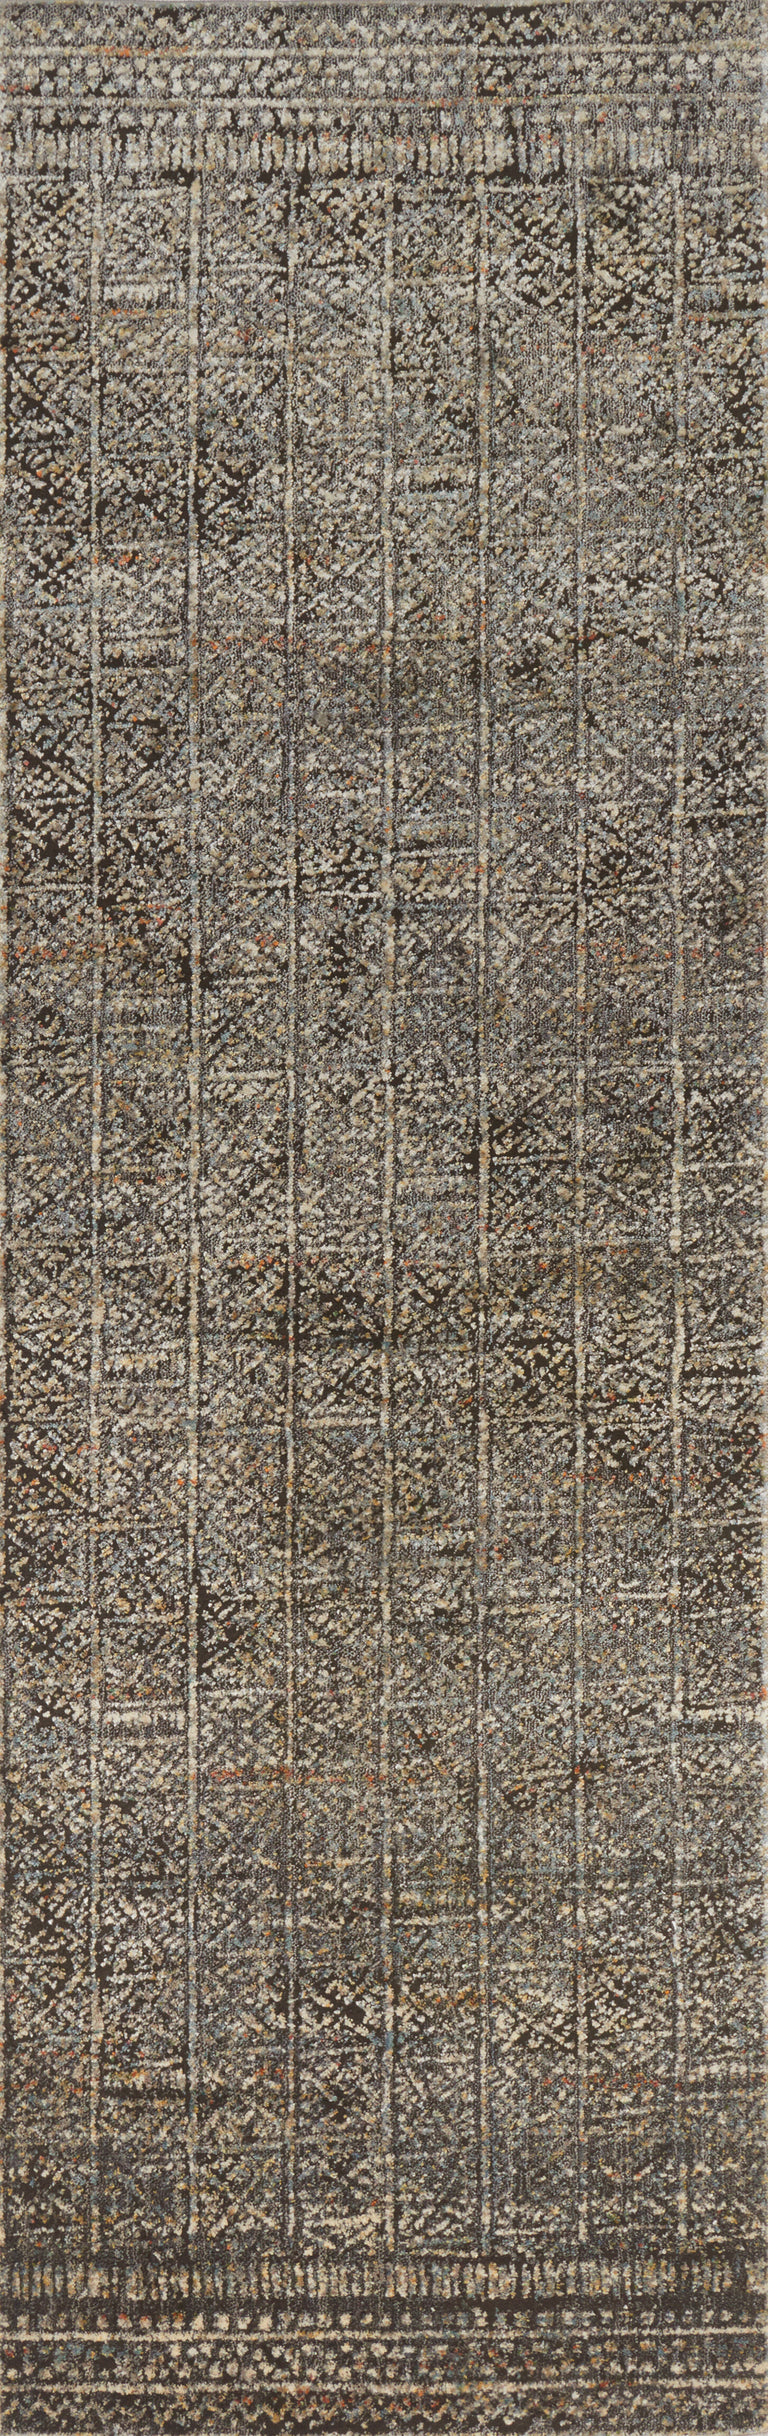 Loloi Rugs Javari Collection Rug in Charcoal, Silver - 12'0" x 15'0"